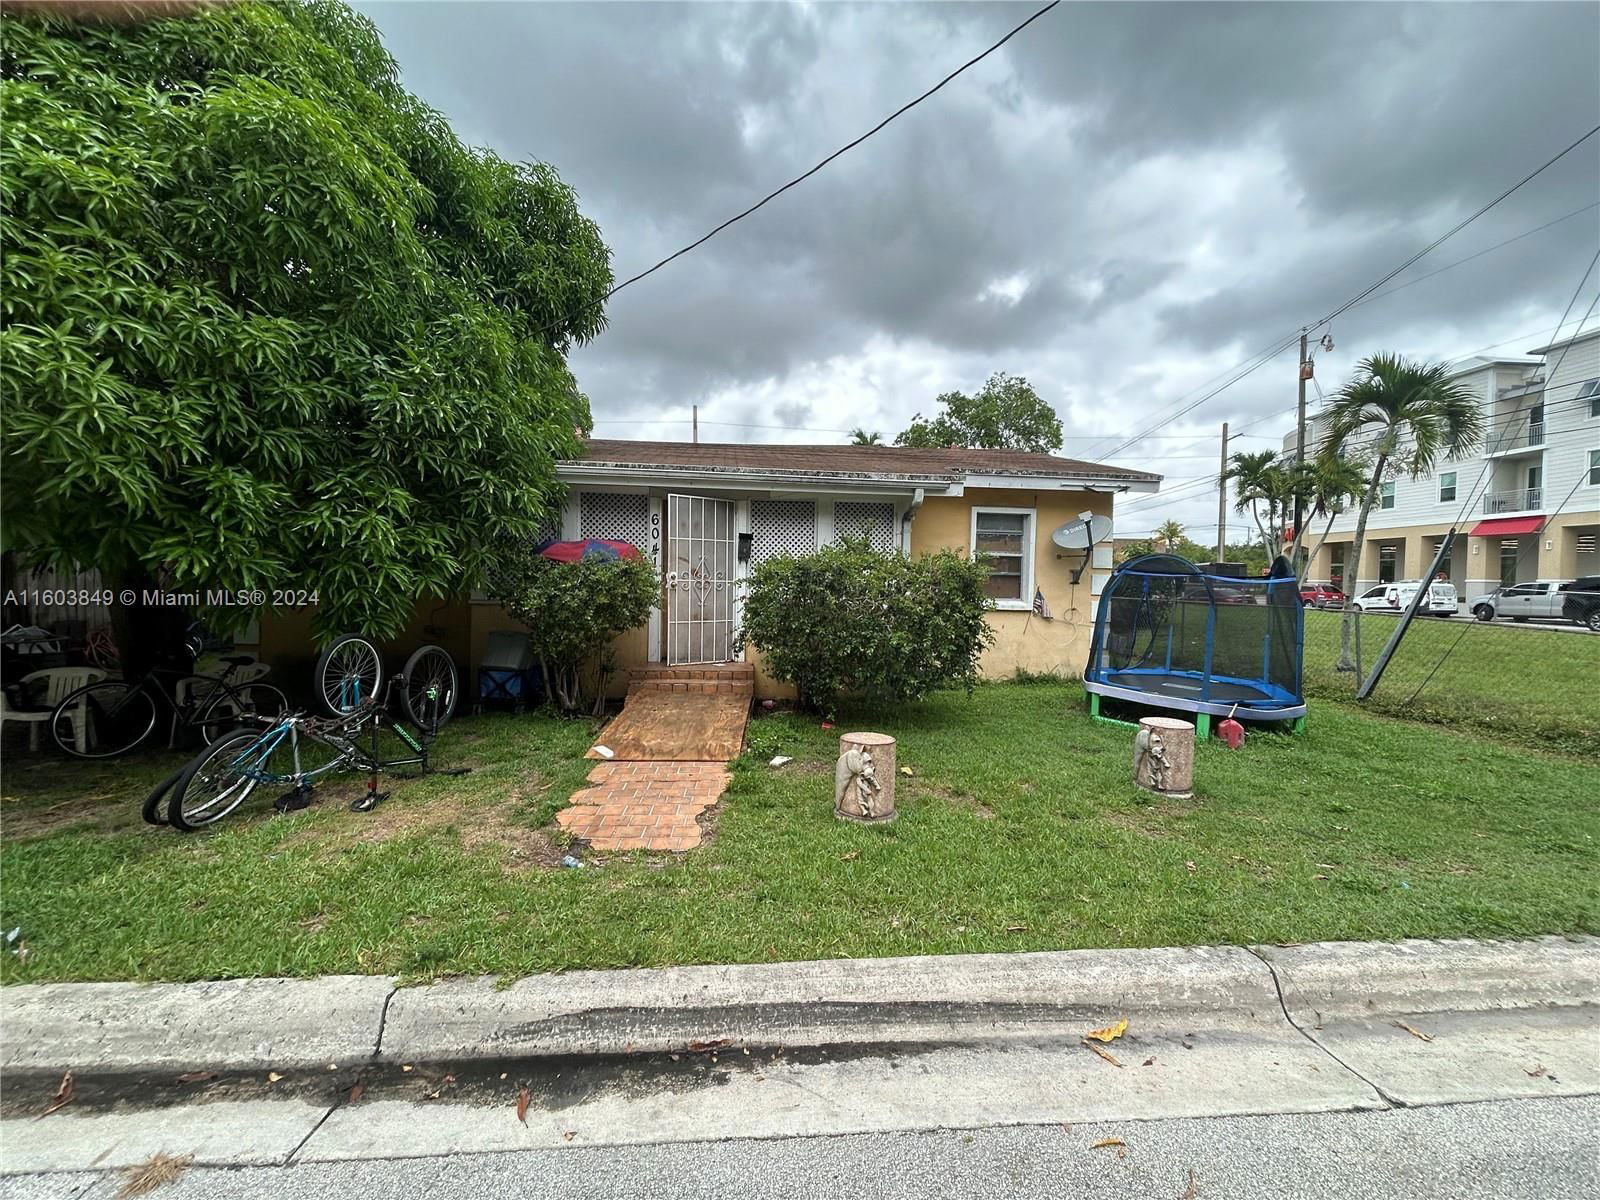 Real estate property located at 6041 64th Ter, Miami-Dade County, 25 54 40 .11 AC E60FT, South Miami, FL